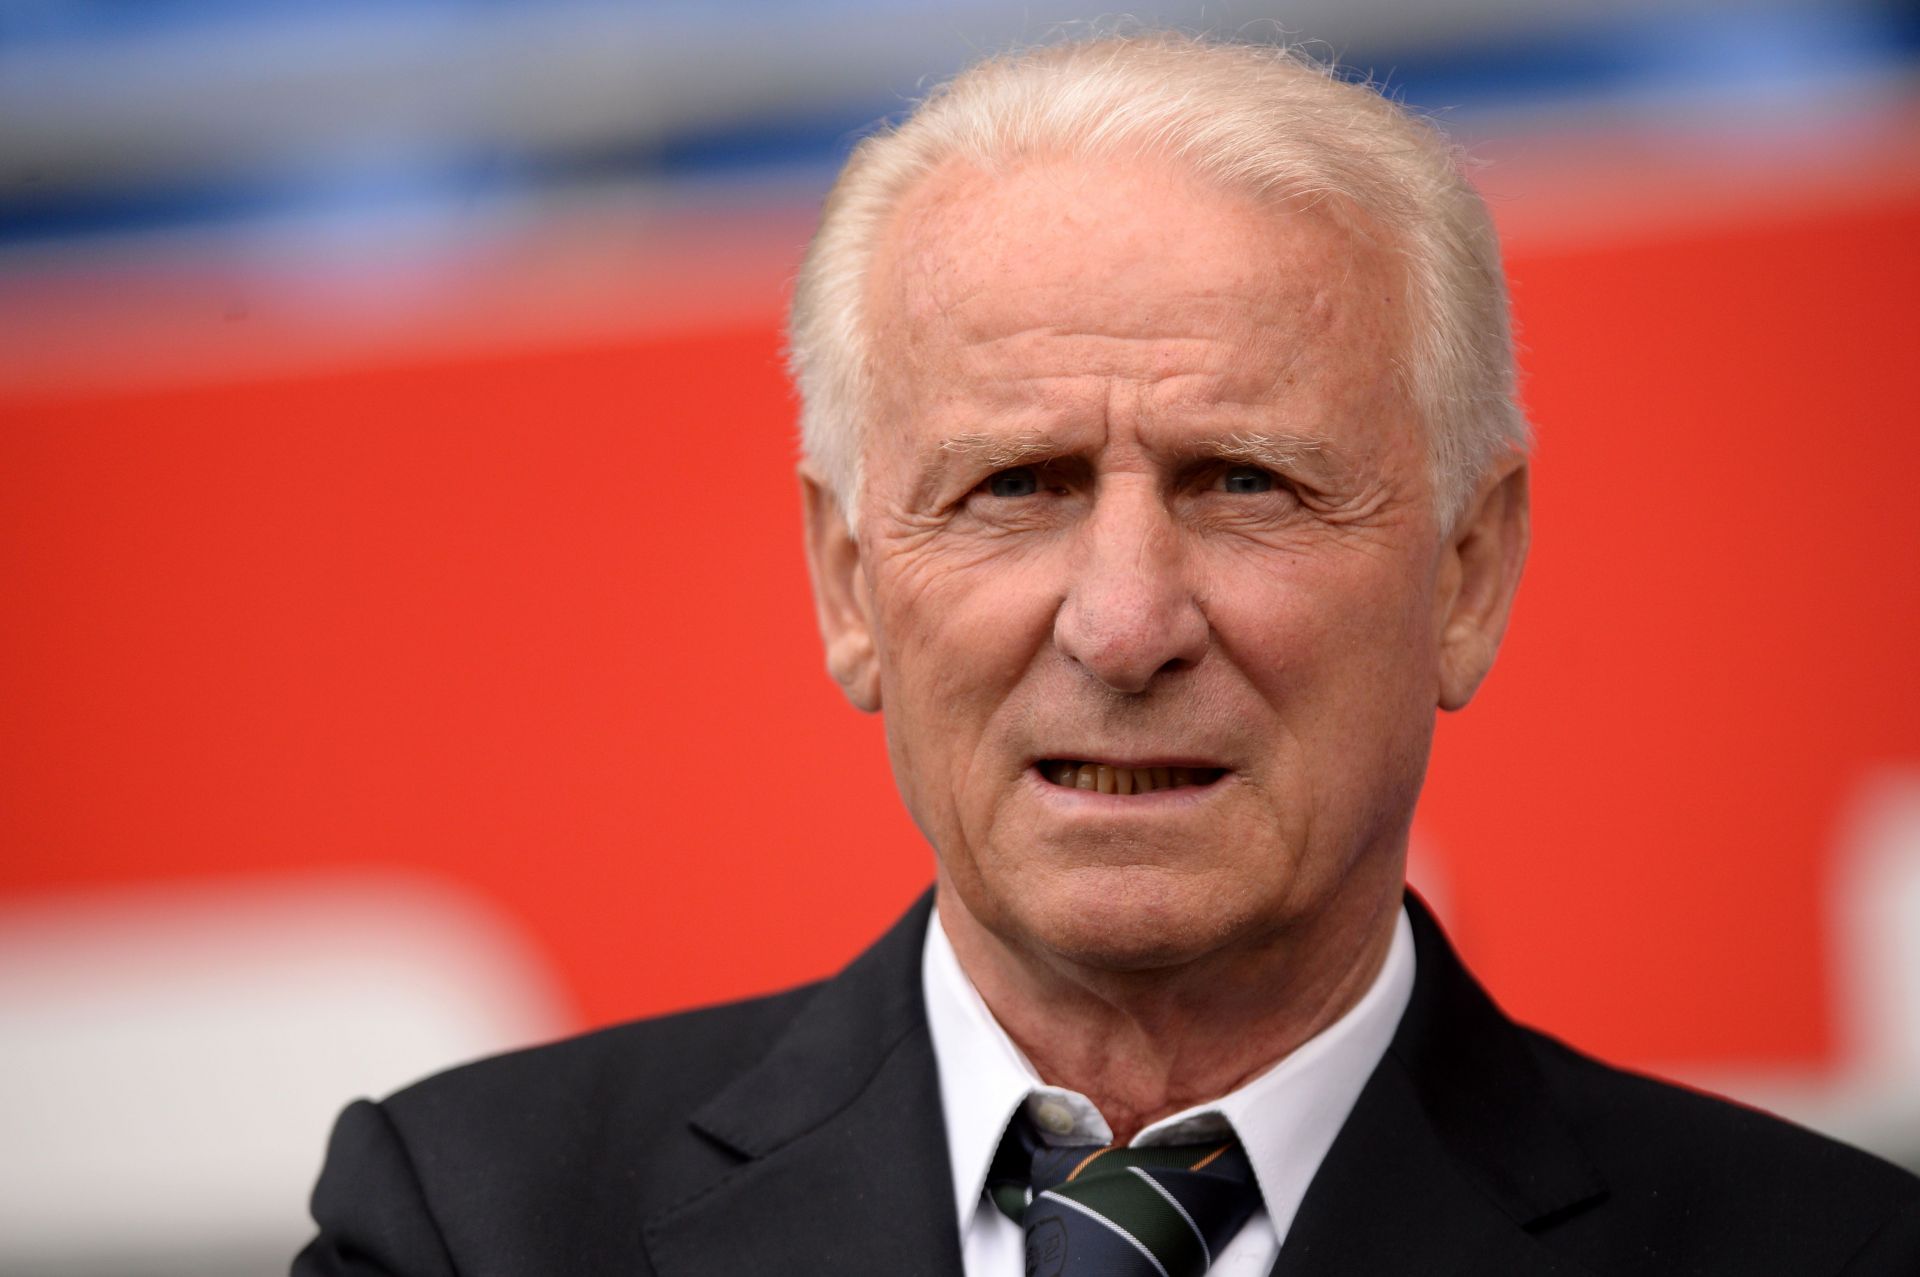  Giovanni Trapattoni during his time as the manager of the Ireland national team